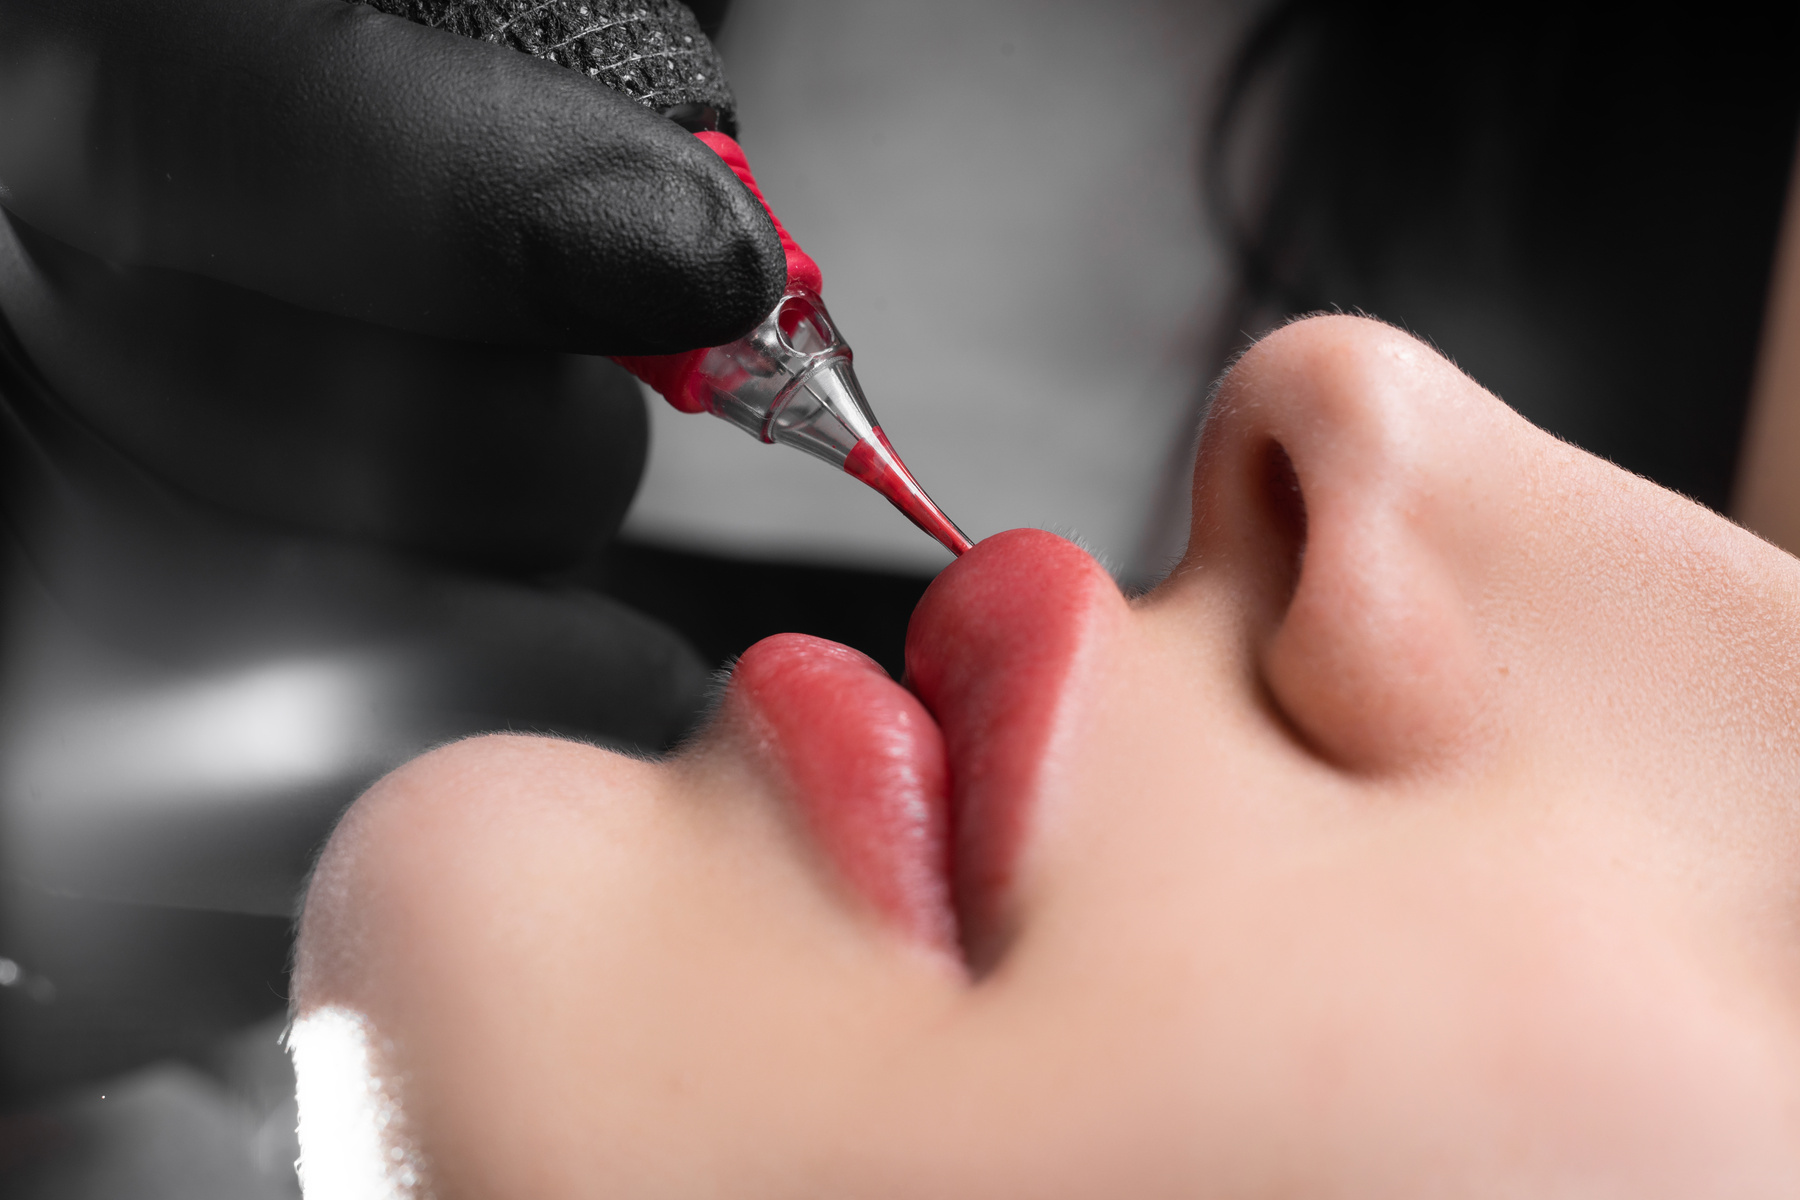 lip tattoo in a beauty salon, the process of applying coloring pigment to the lips, permanent lip makeup, female beauty